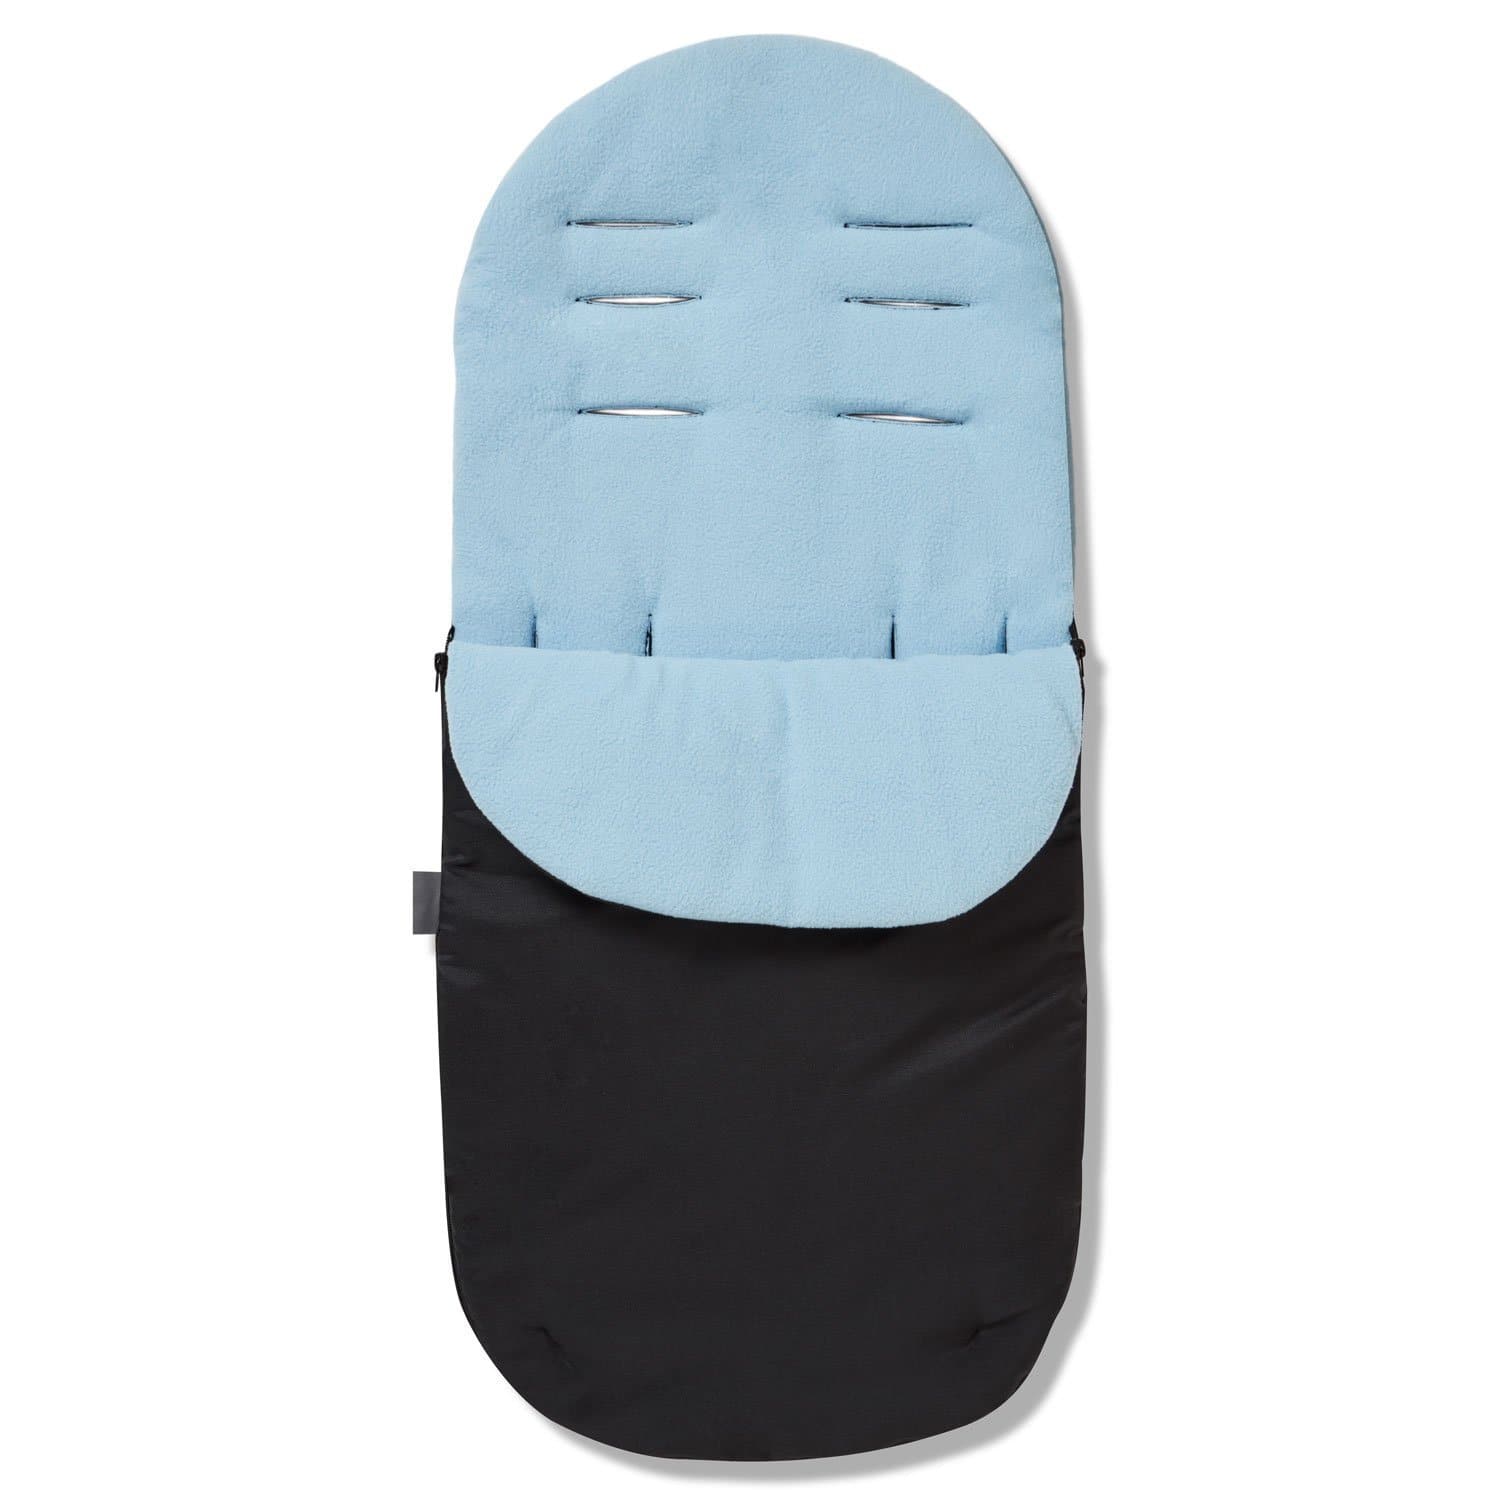 Footmuff / Cosy Toes Compatible with GB - Light Blue / Fits All Models | For Your Little One